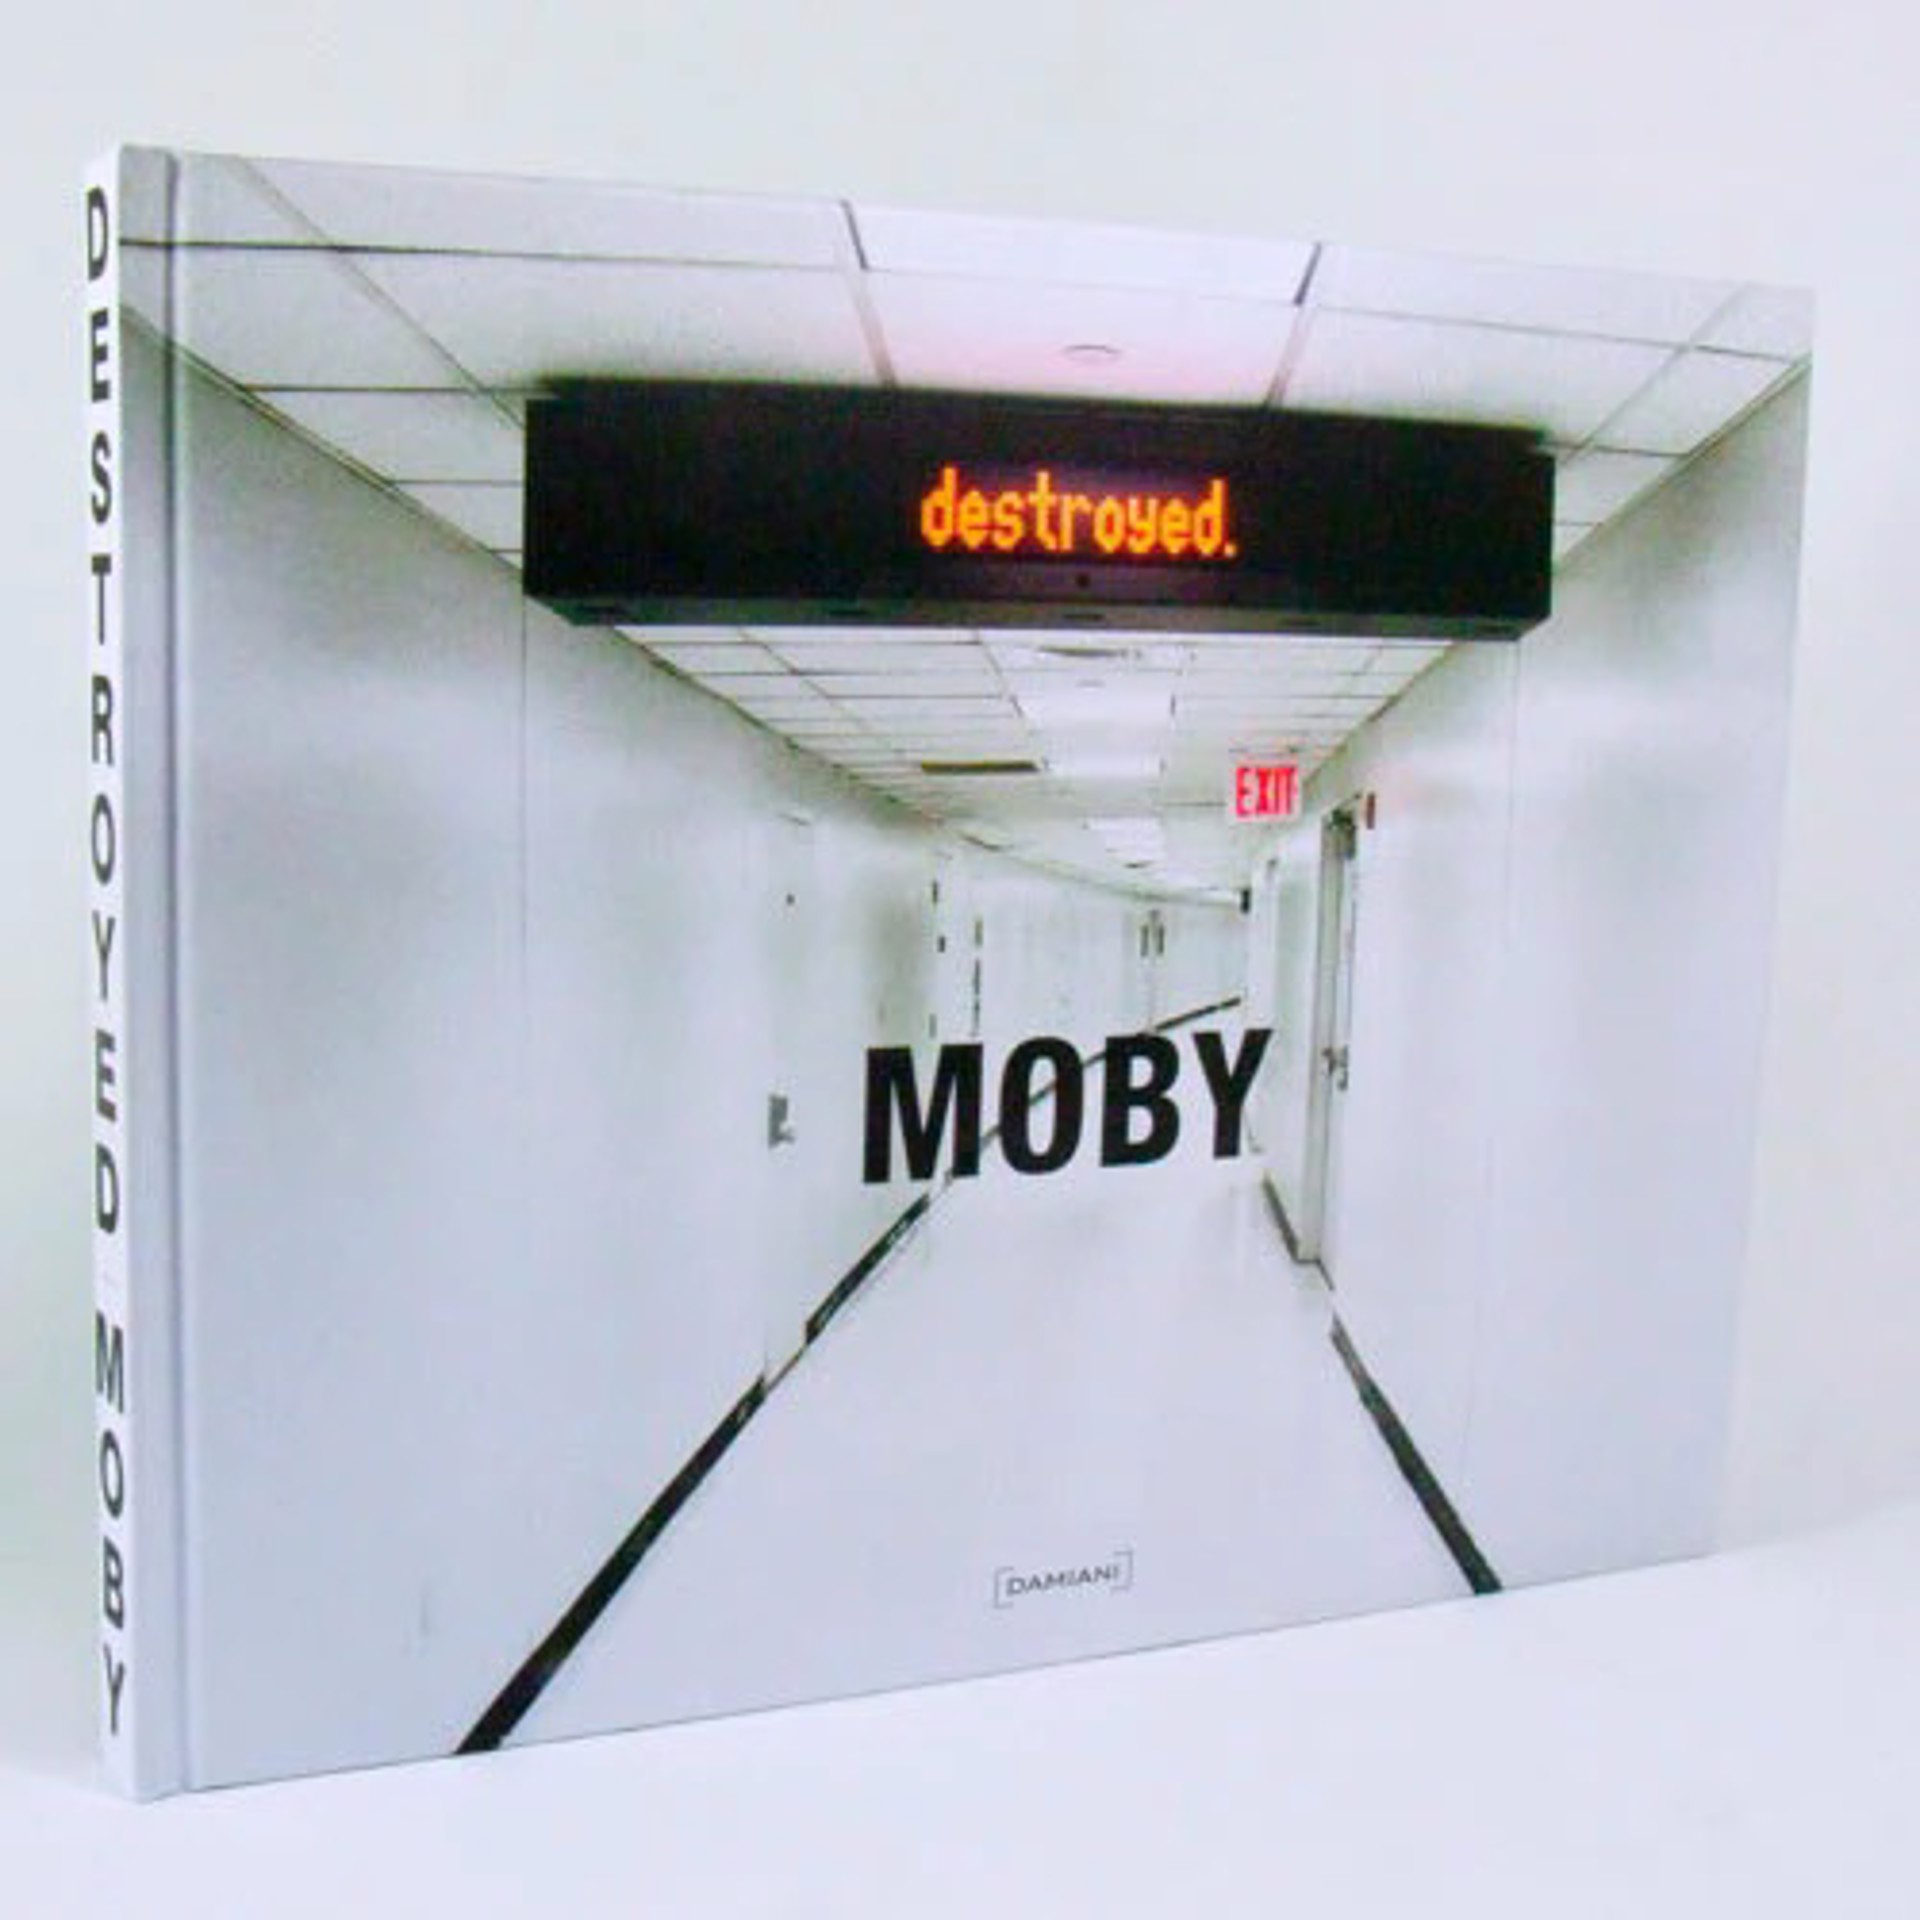 Moby: Destroyed by Moby